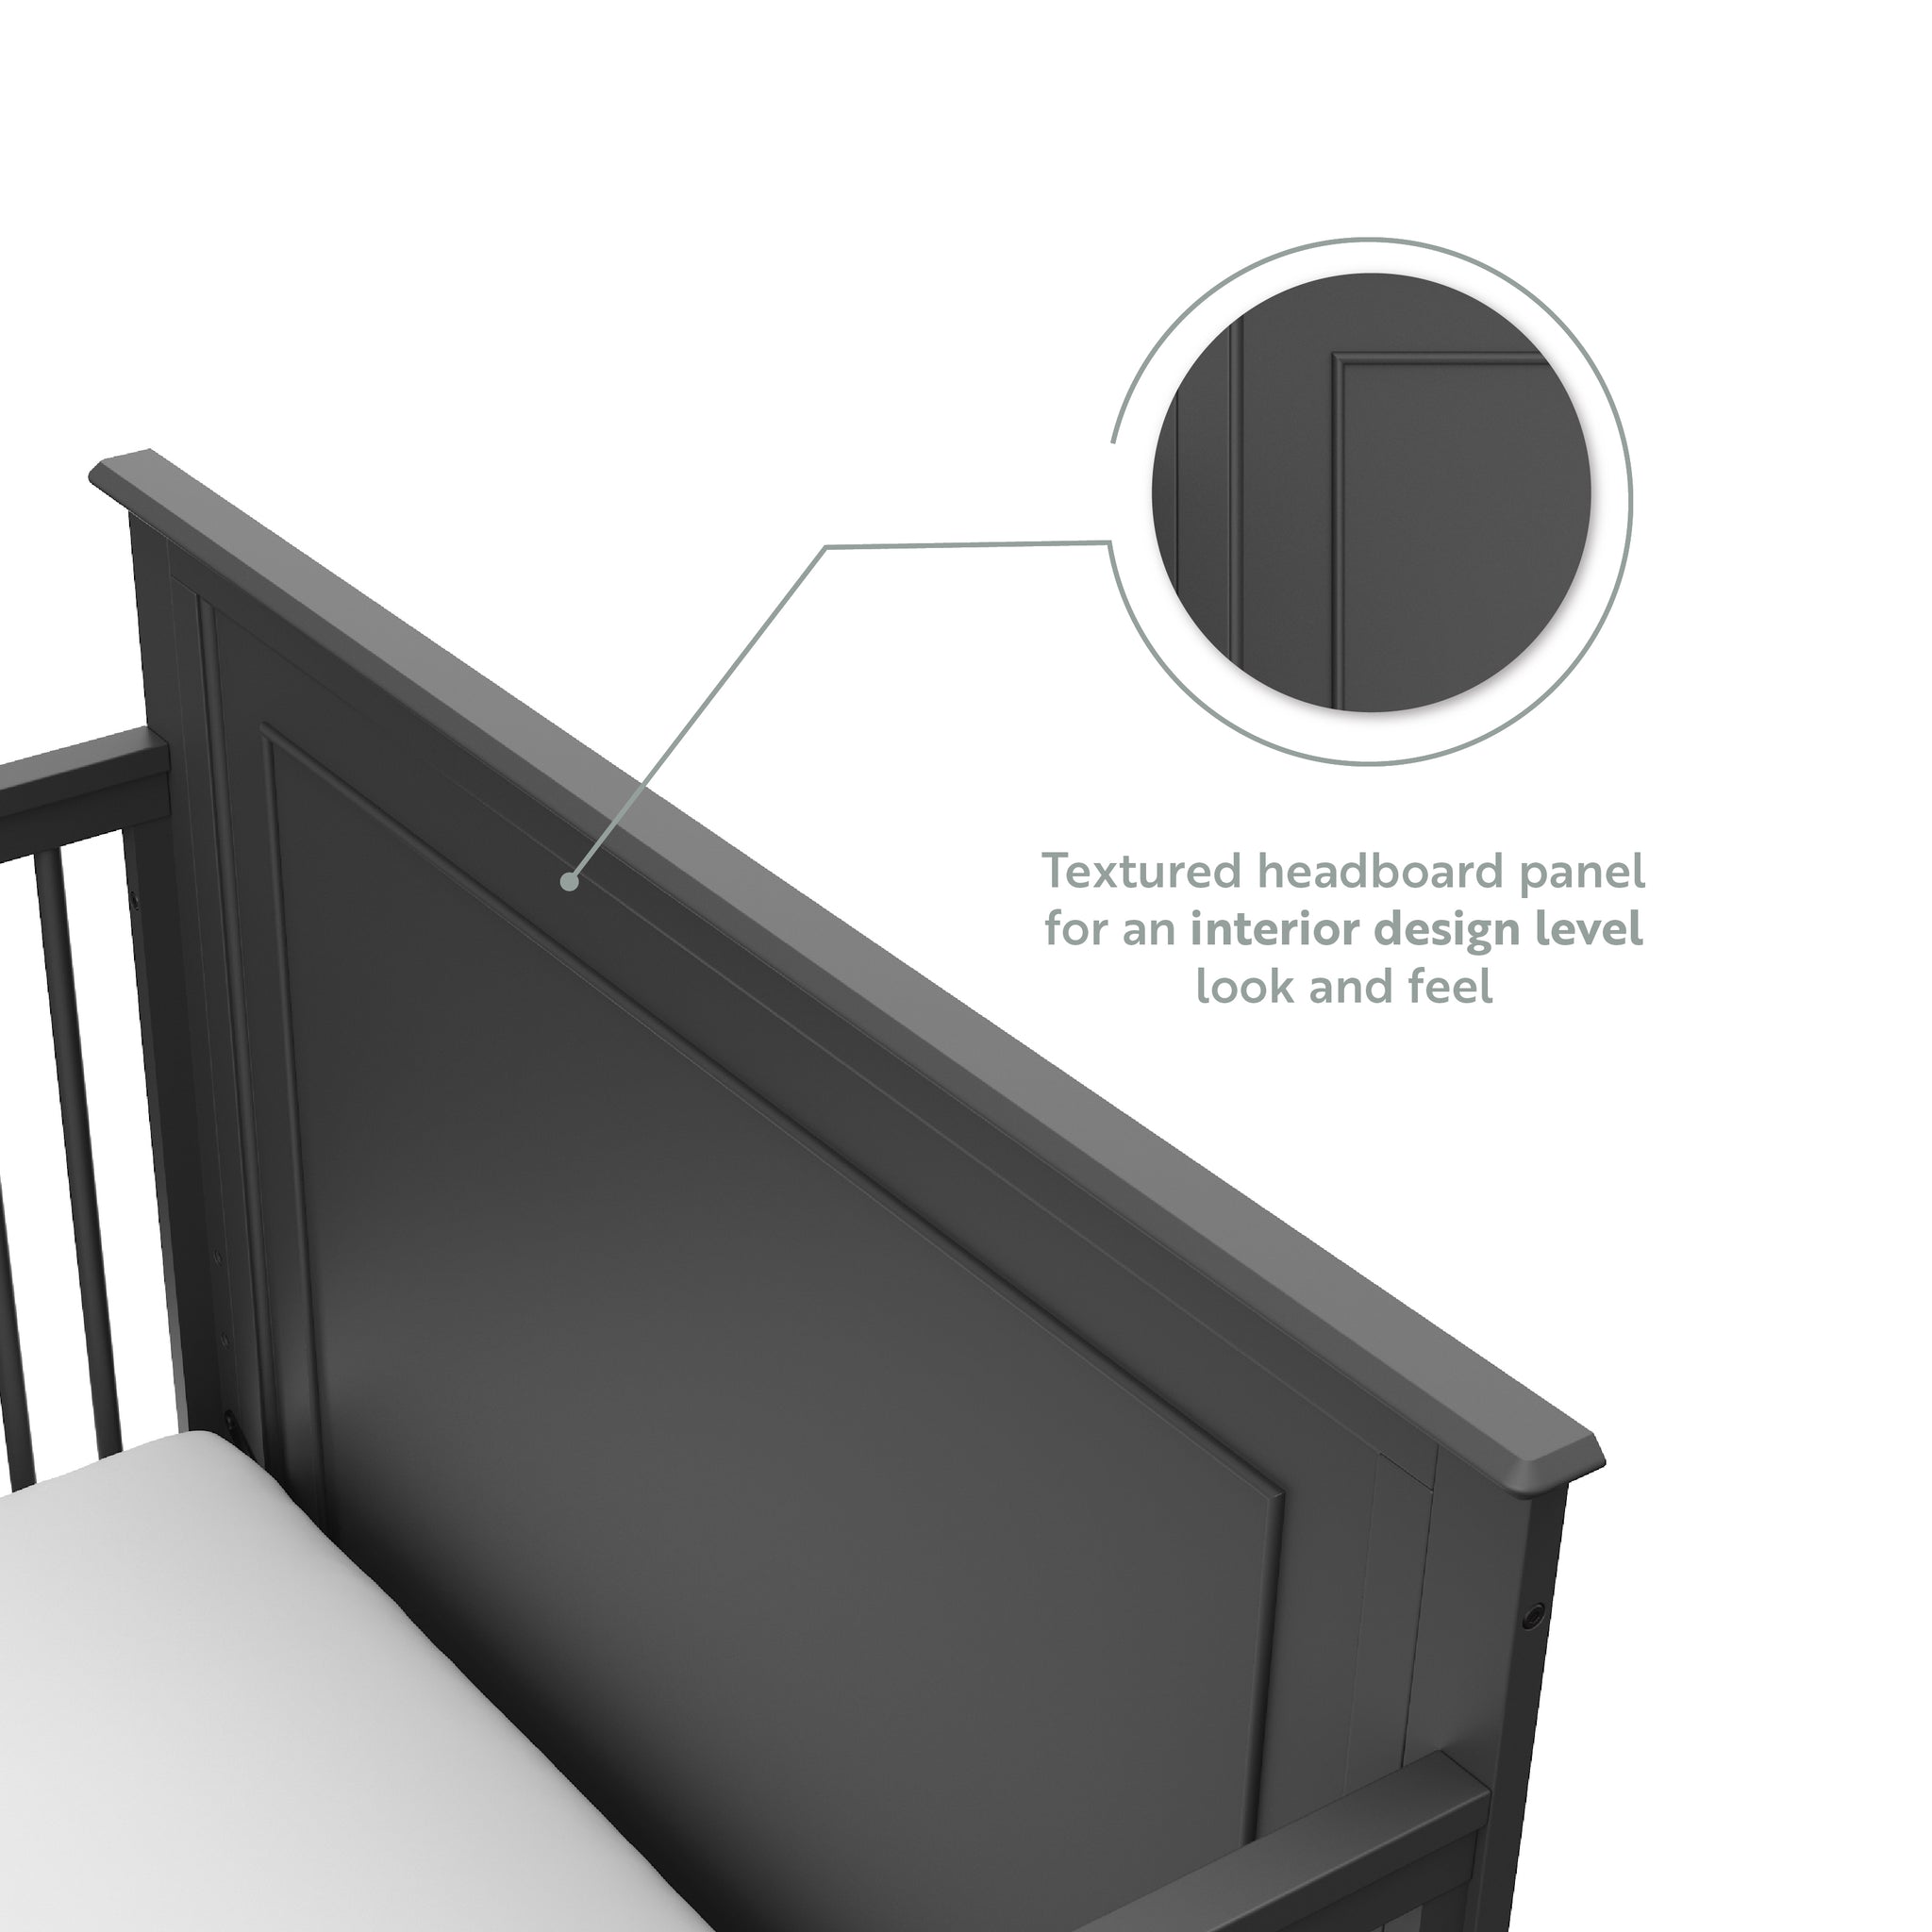 gray crib features graphic 